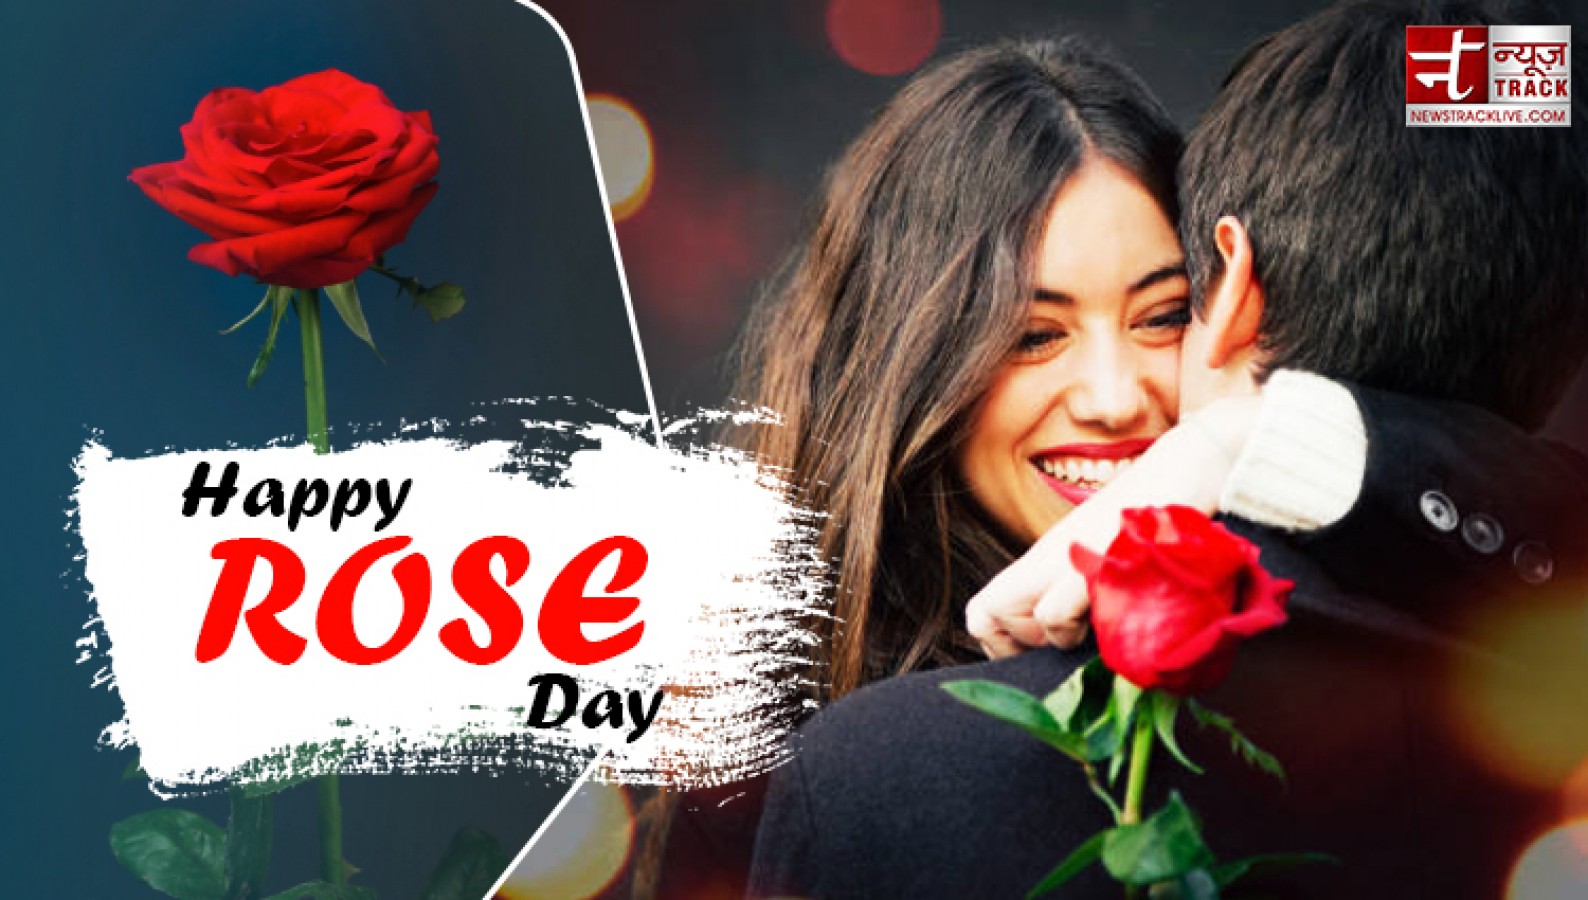 Happy Rose Day: You are a Rose of My Dream... | NewsTrack English 1